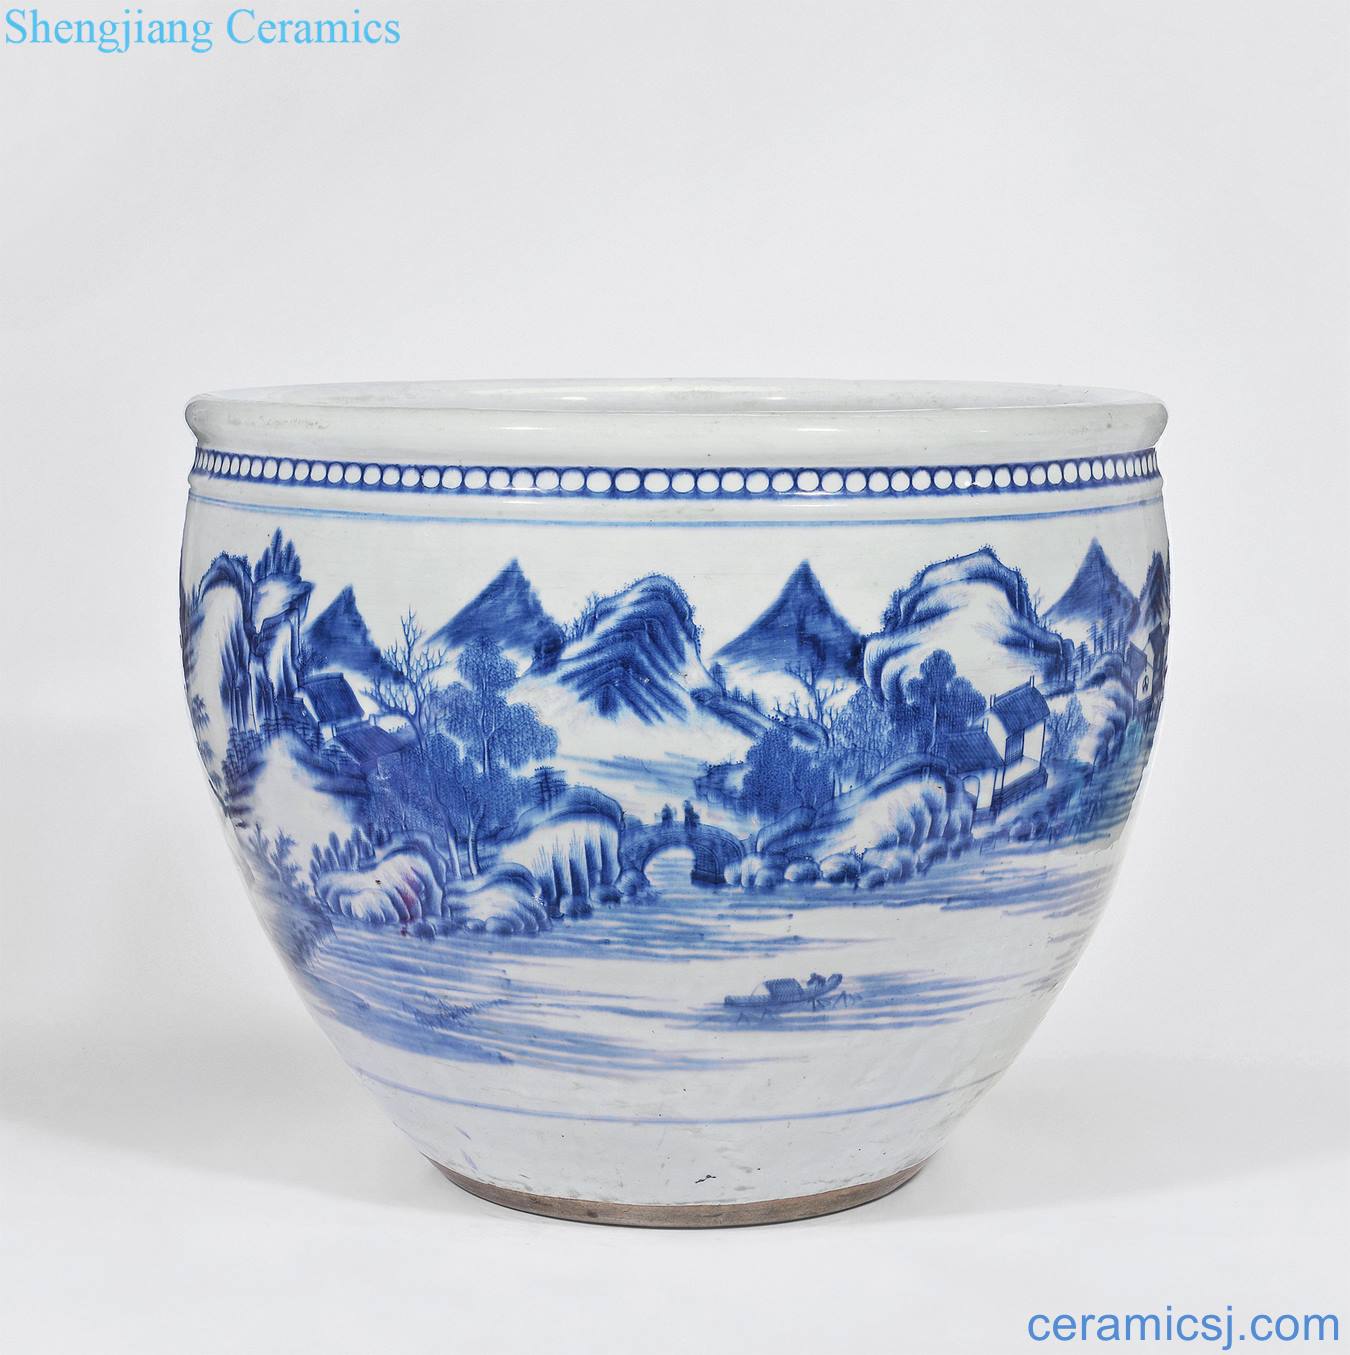 Qing yongzheng Blue and white landscape character lines vats